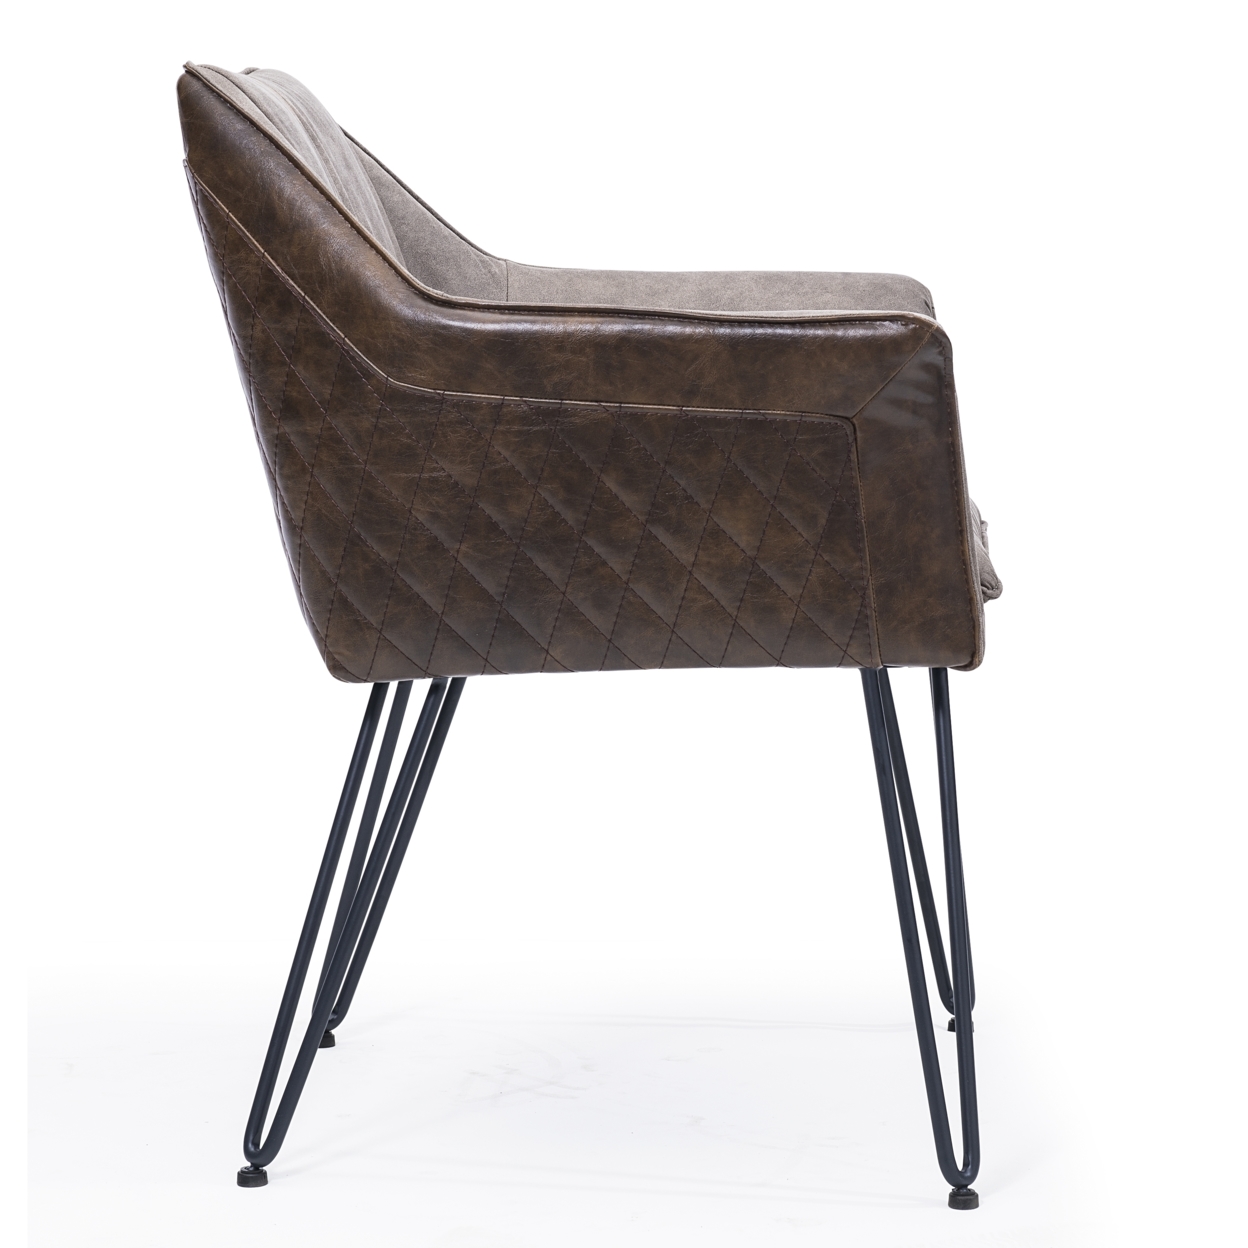 Leather Upholstered Metal Chair With Diamond Stitched Details, Rustic Brown And Black- Saltoro Sherpi